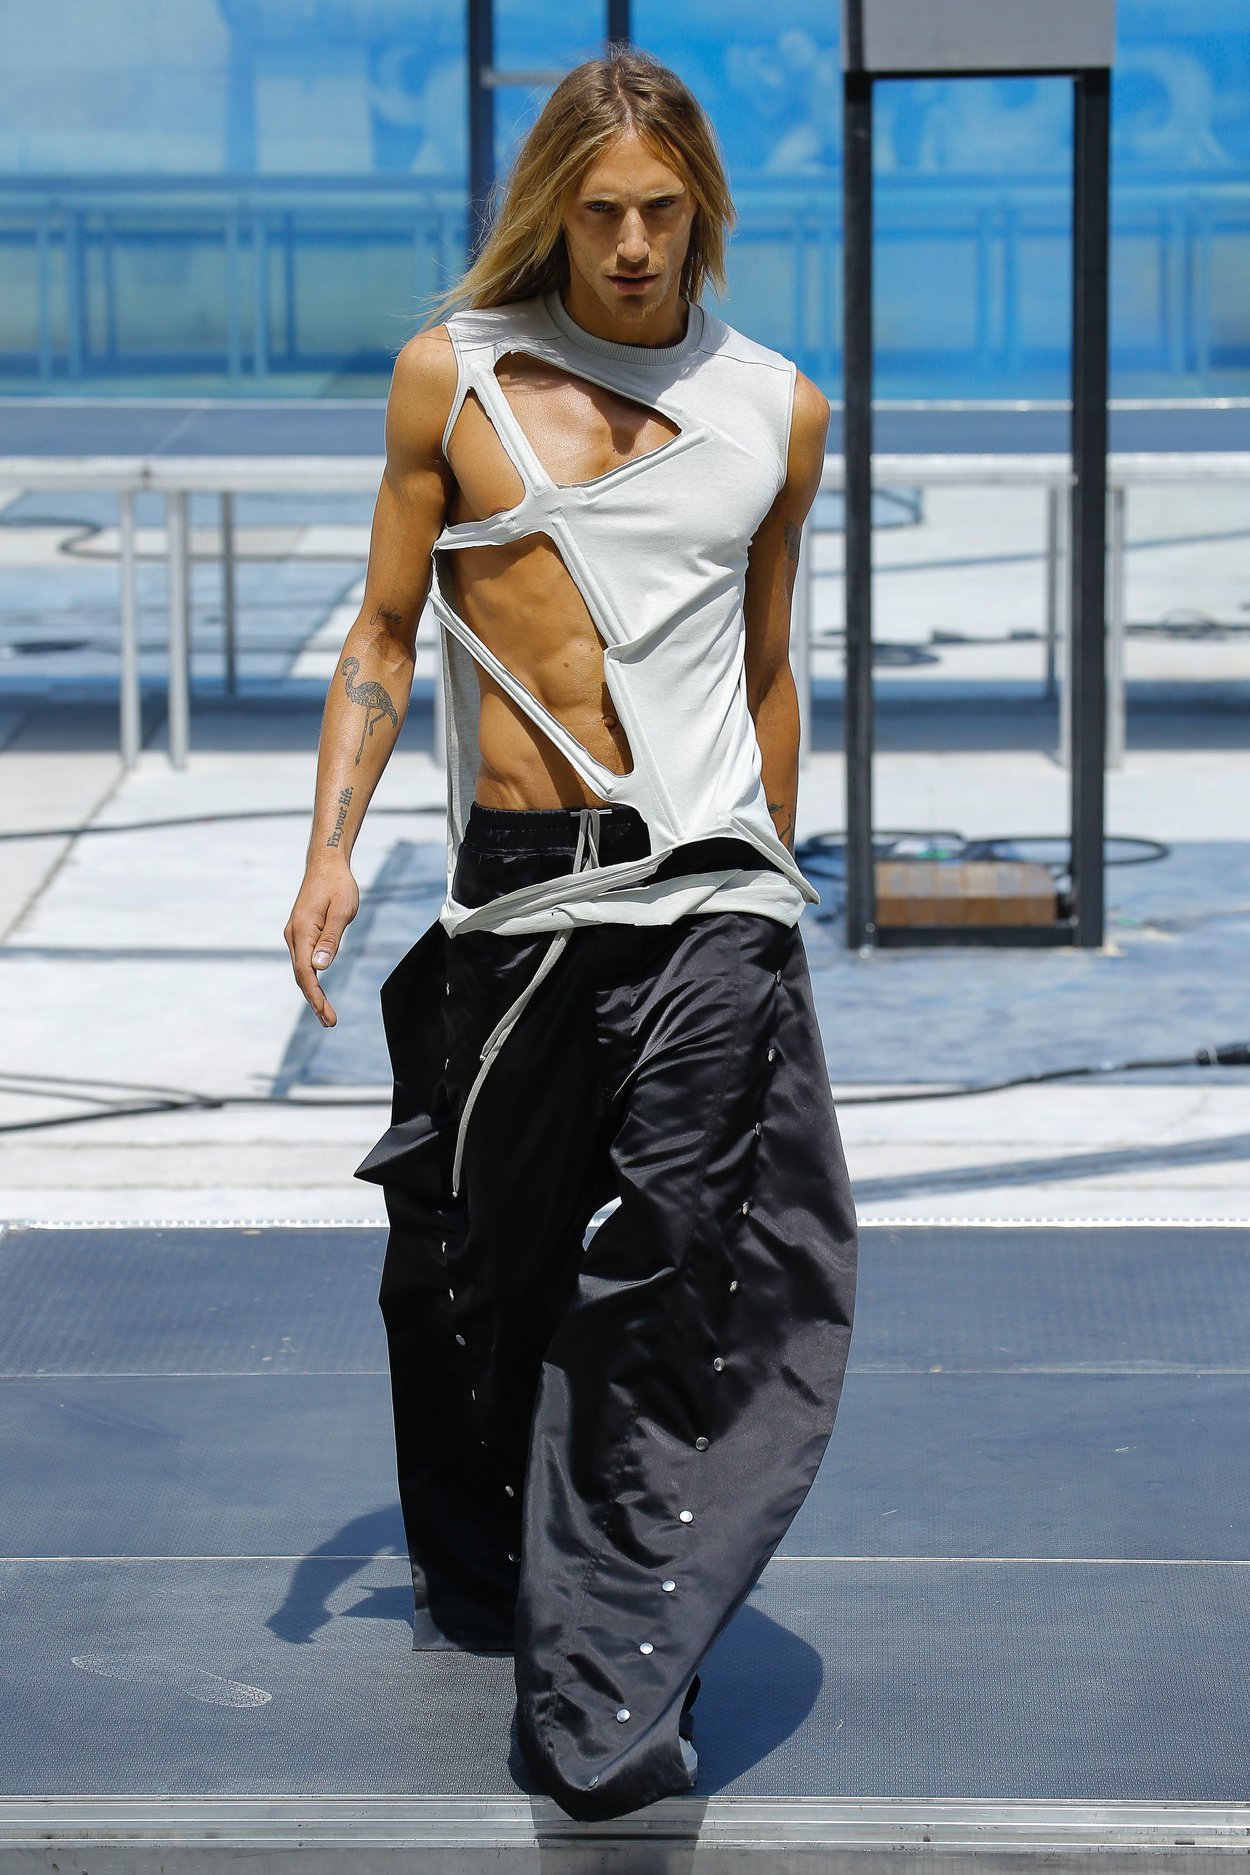 Rick Owens' New Collection is The Most Confusing Thing You'll See Today ...